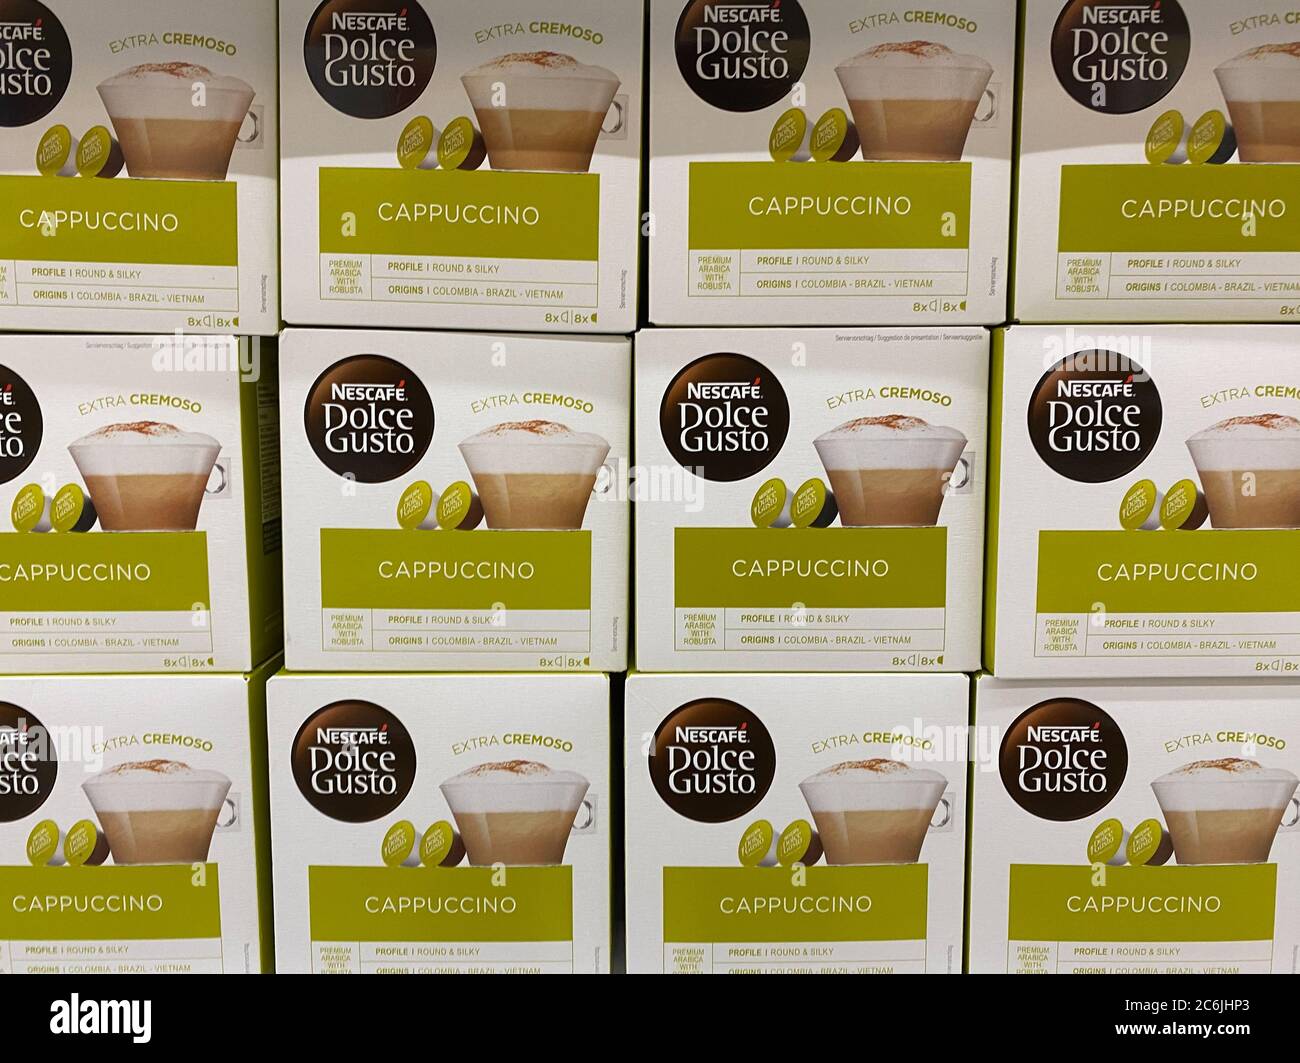 CAFE NESCAFE DOLCE GUSTO CAPPUCCINO SKINNY